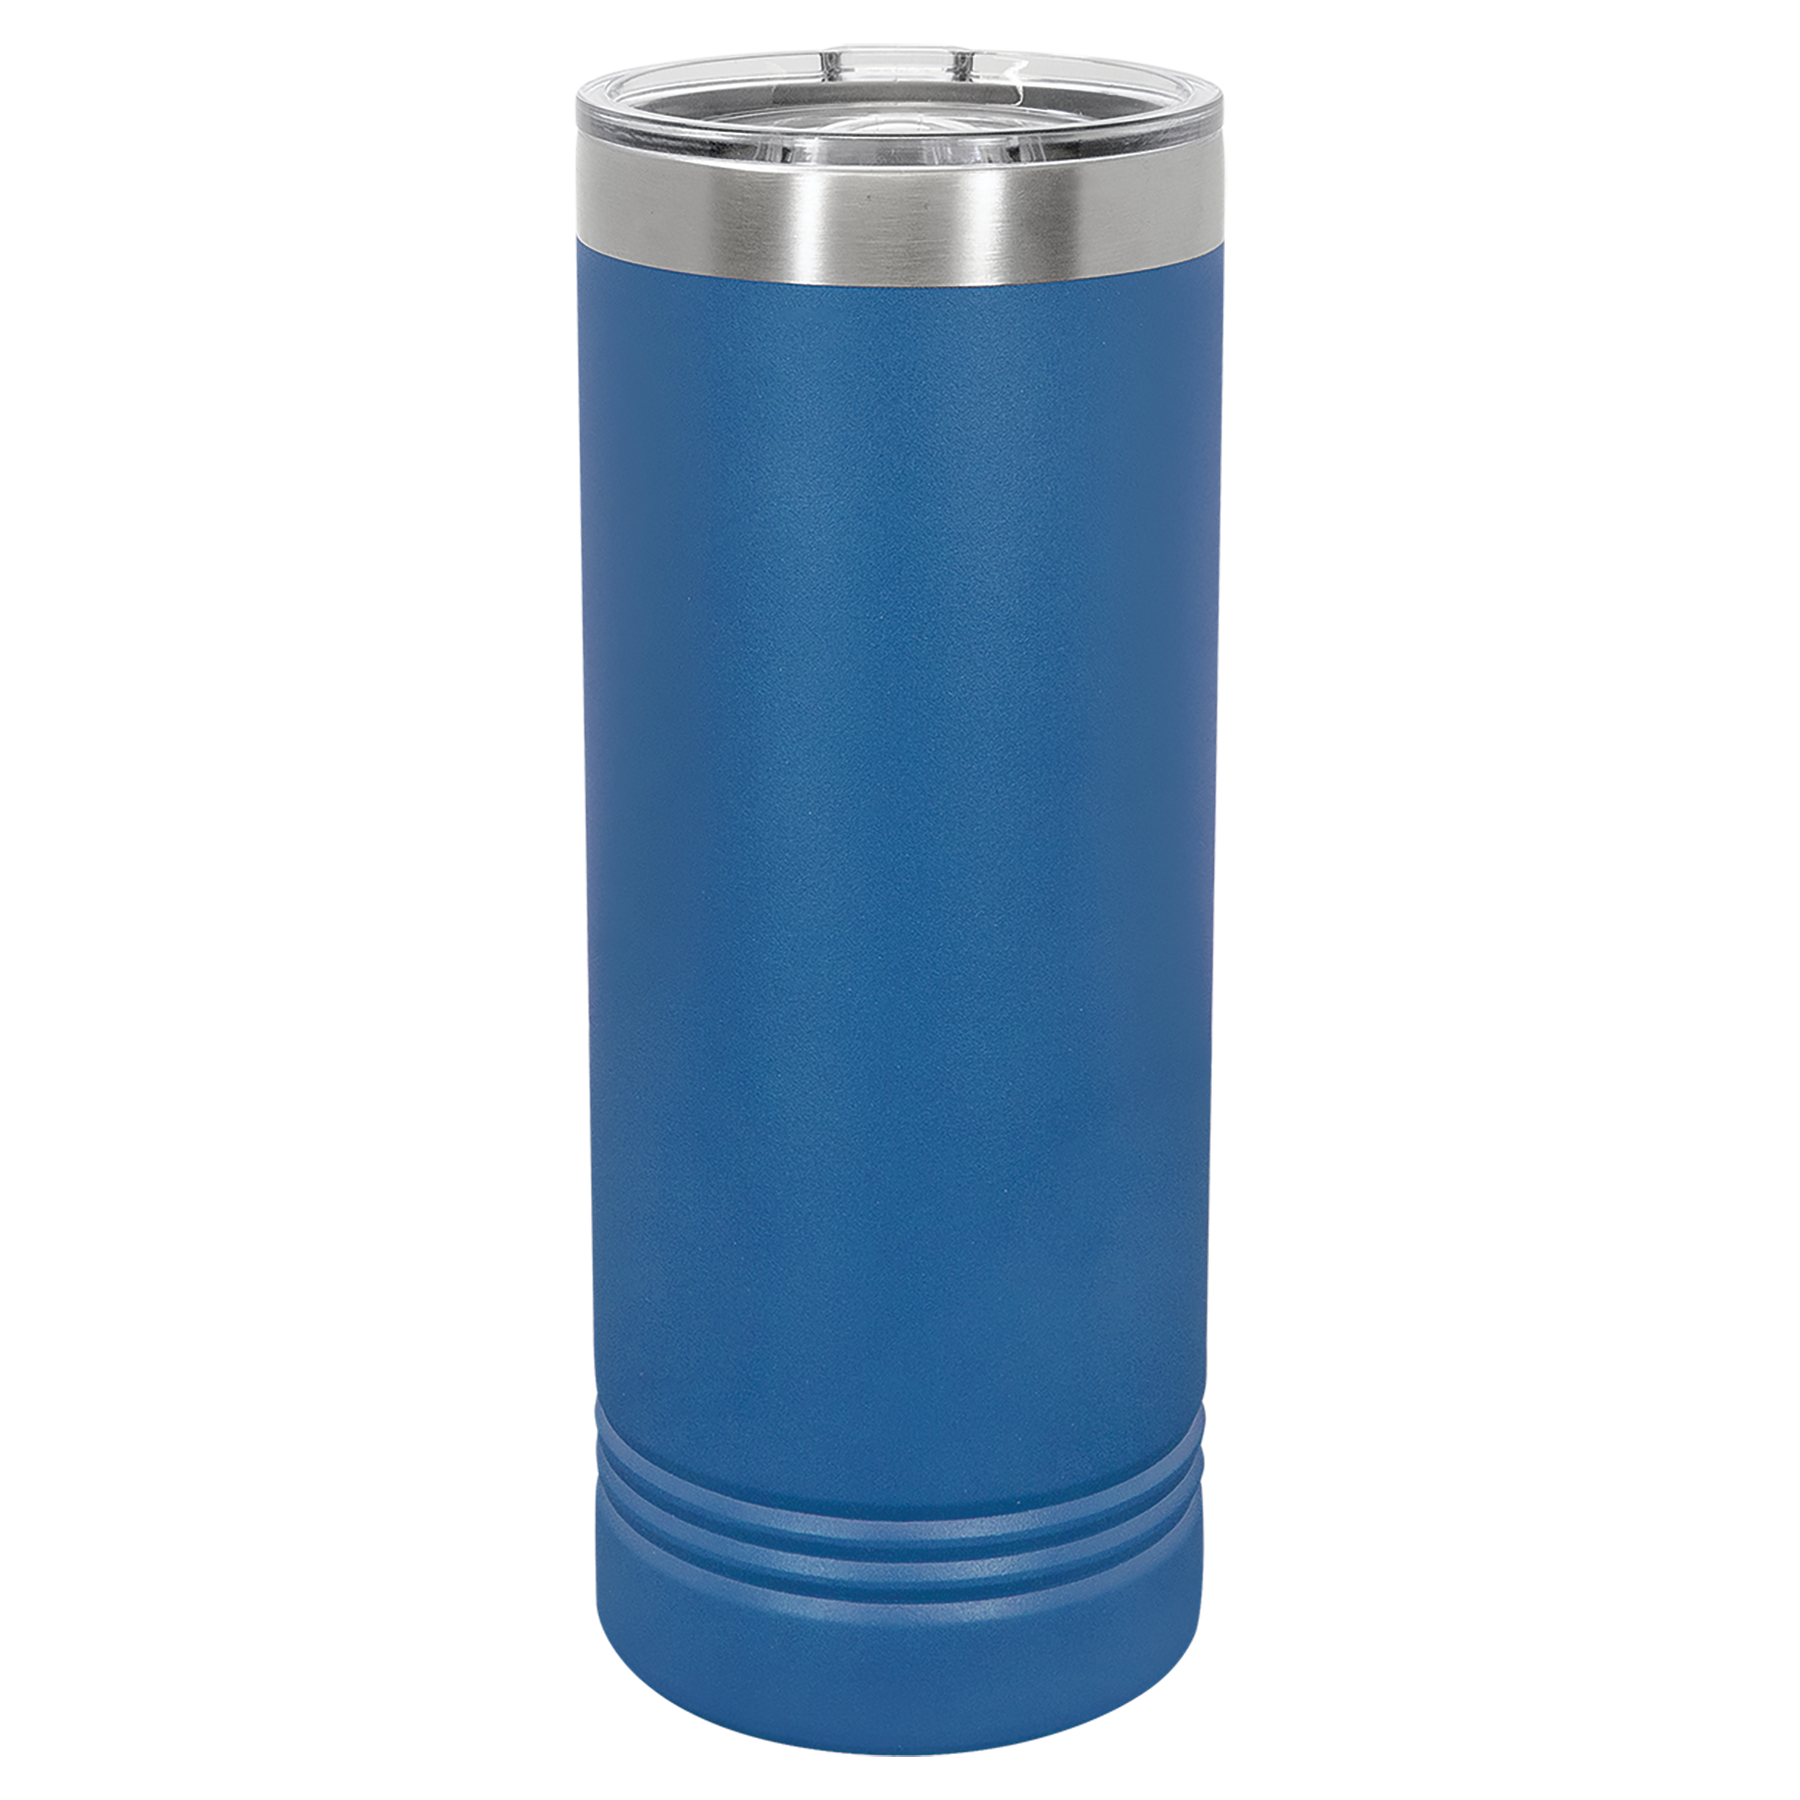 Royal Blue 22oz Skinny Tumbler -One Free Engraving  -Fits most Cup Holders  -Double-wall Vacuum Insulated  -Made from 18/8 Gauge Stainless Steel (Type 304 Food Grade)  -Lid is BPA Free (Hand Wash Only)  -Dishwasher Safe  -Works with Cold and Hot Drinks  -18 Color Options  -Perfect for Personalized Gifts, Awards, Incentives, Swag & Fundraisers